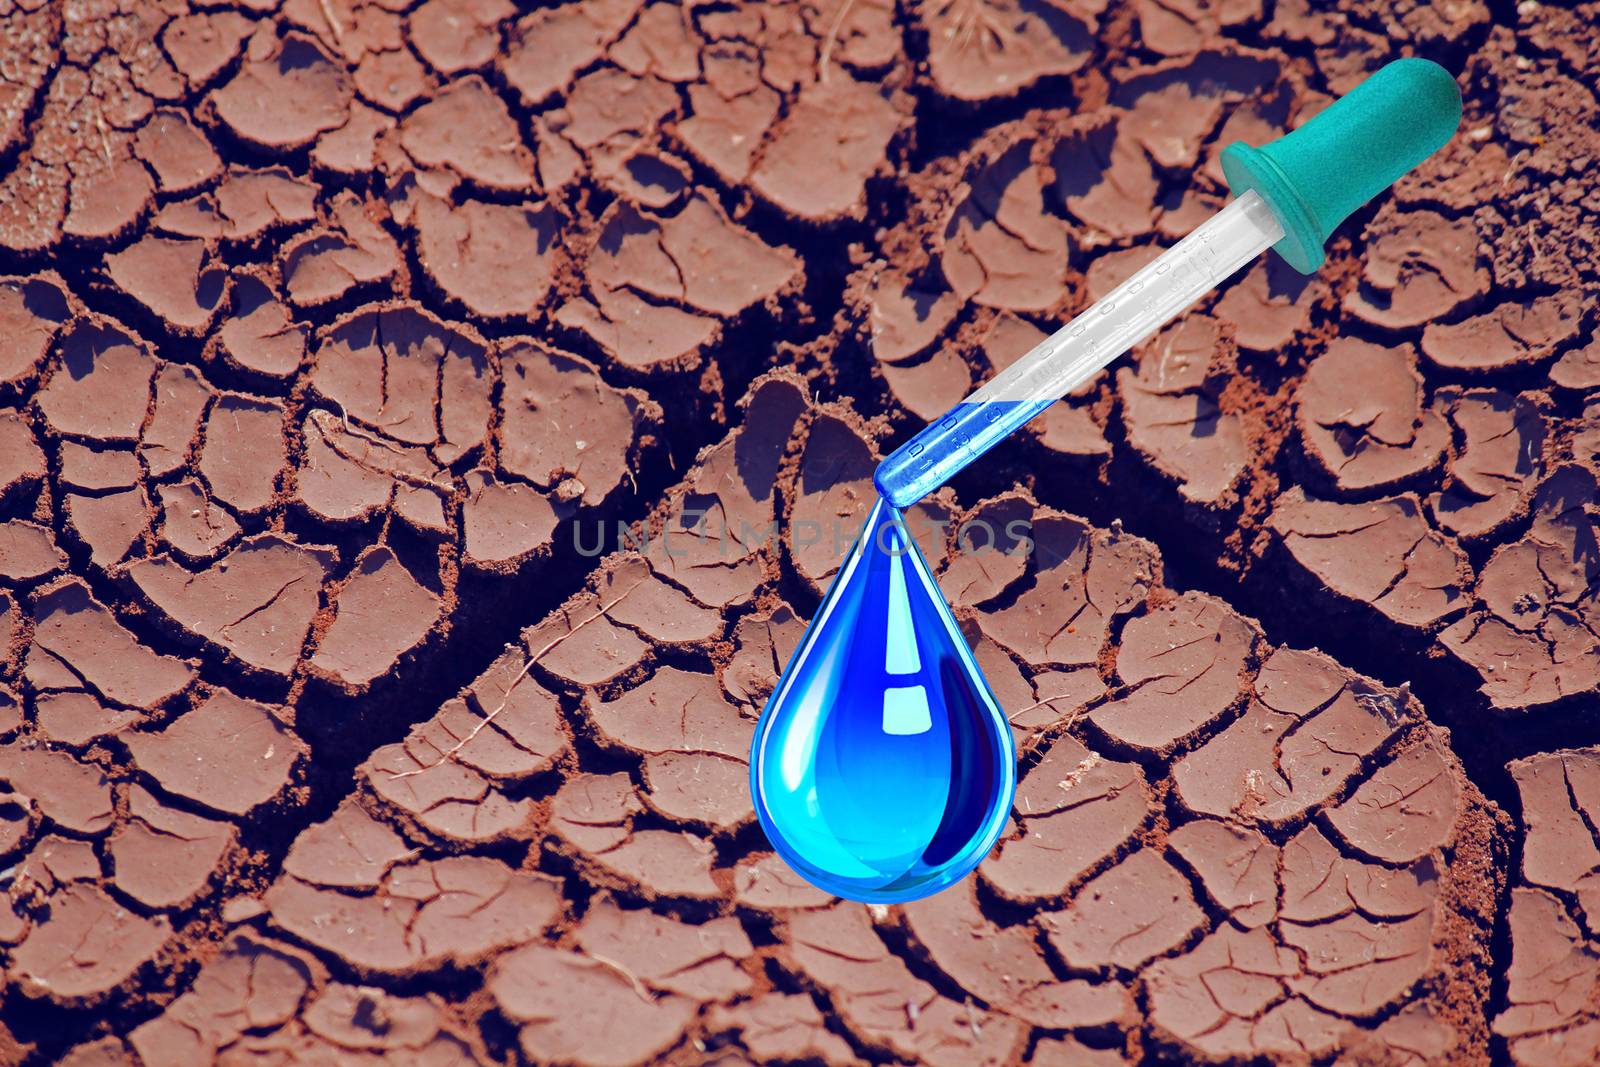 Cracked land, Save water, Save Earth Concept, Conceptual image by yands